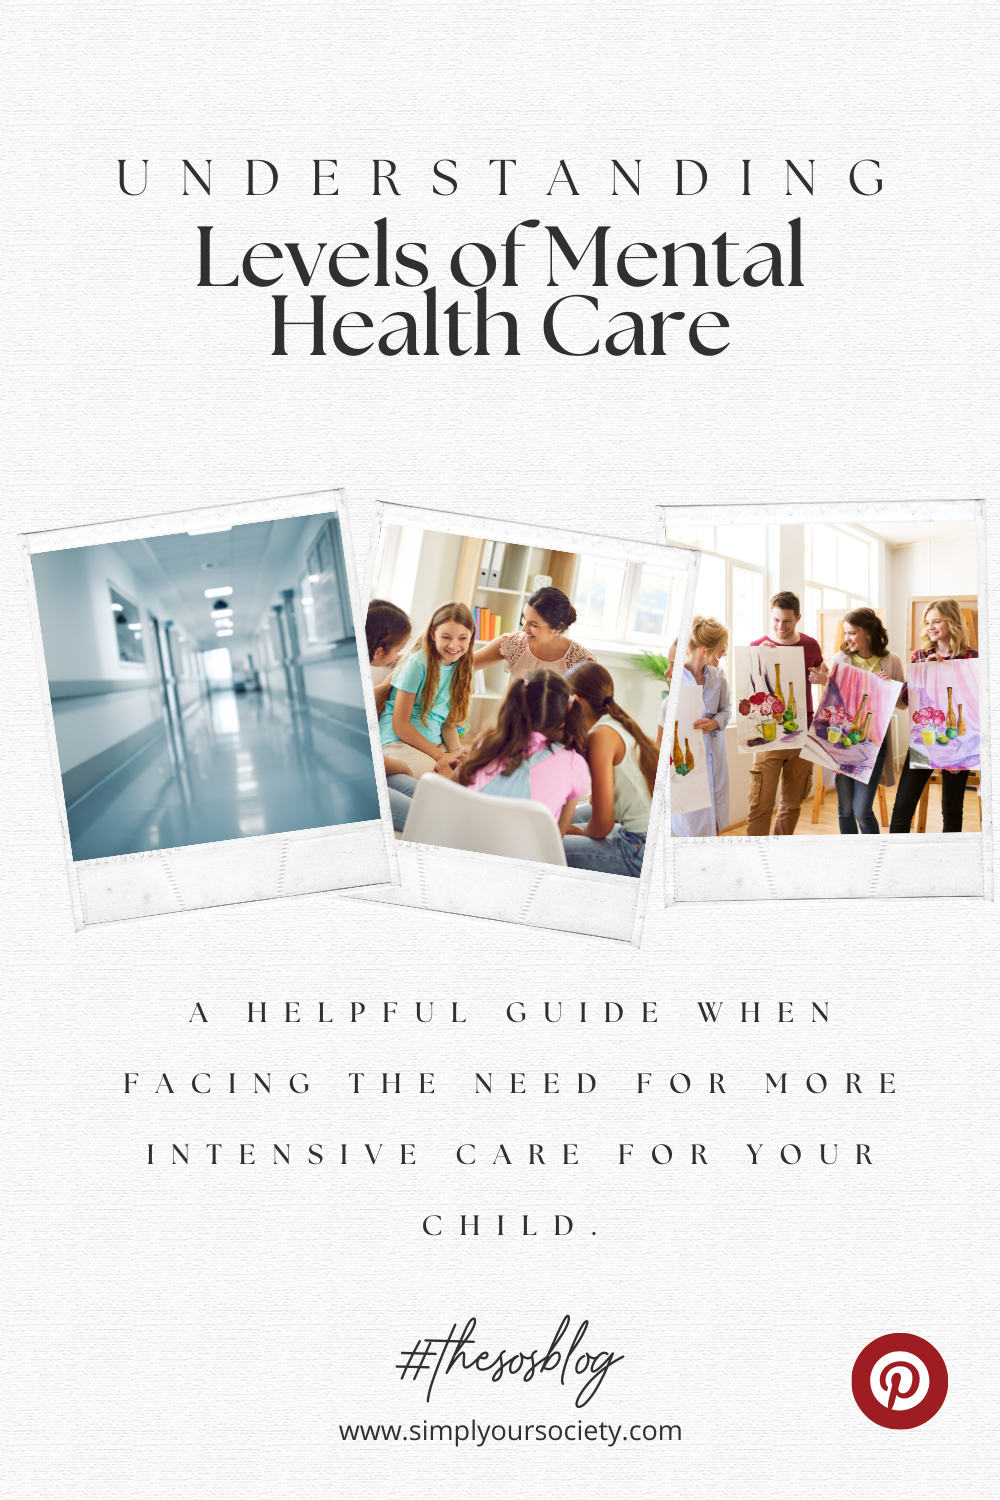 levels of care, behavioral health, anxiety disorder, mental health care, individual treatment, group treatment, outpatient treatment, day treatment